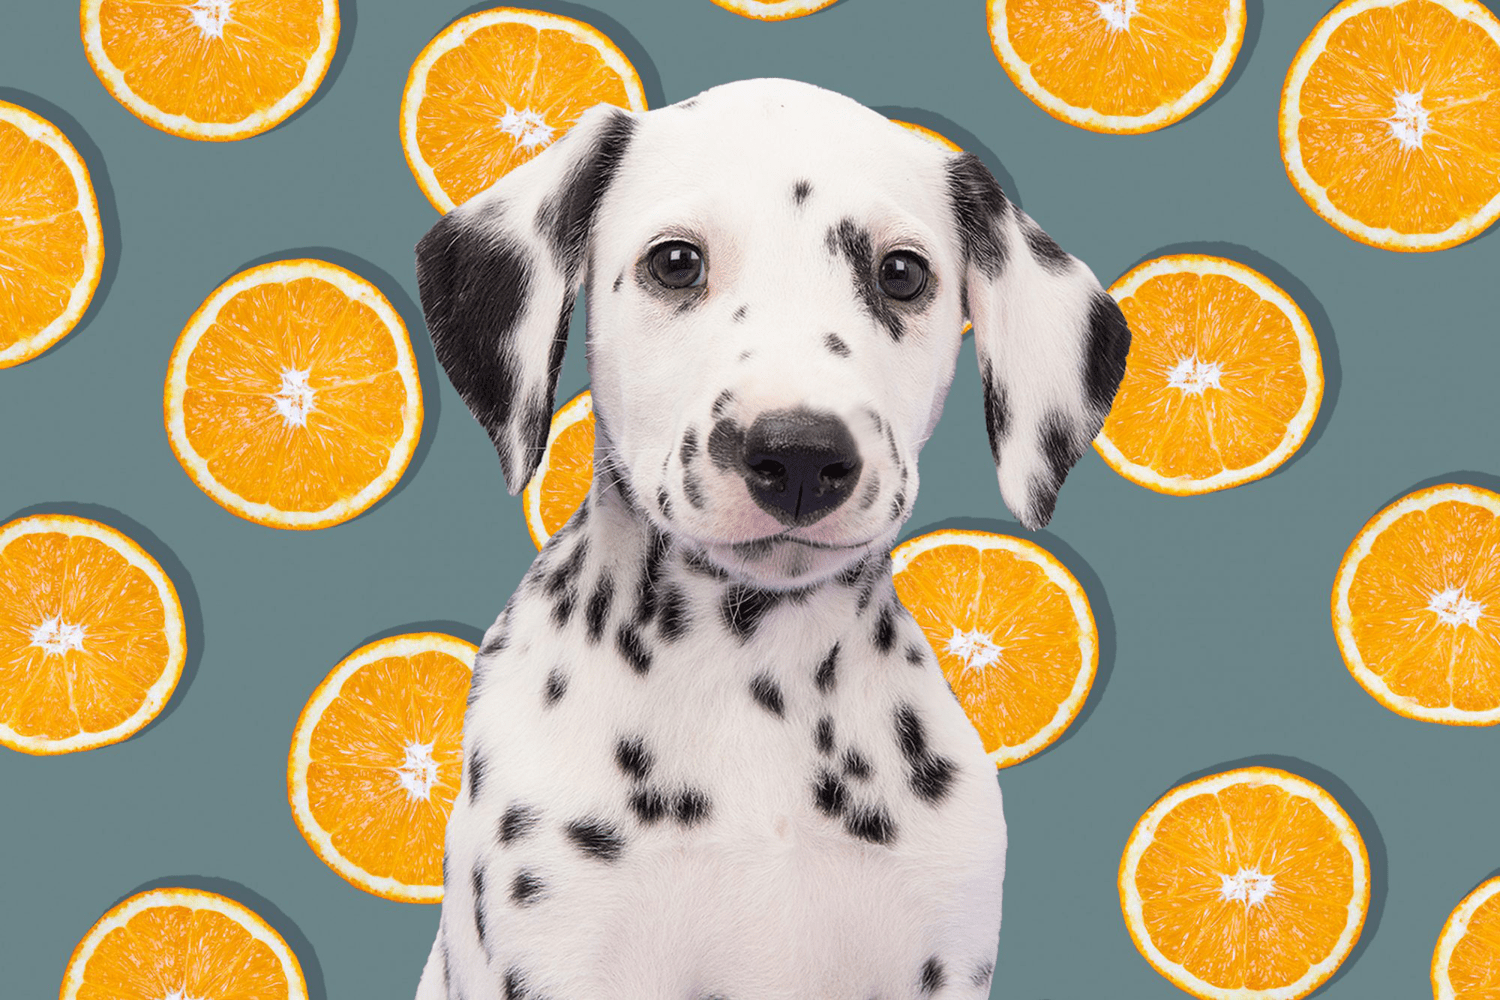 are dogs allowed tangerines